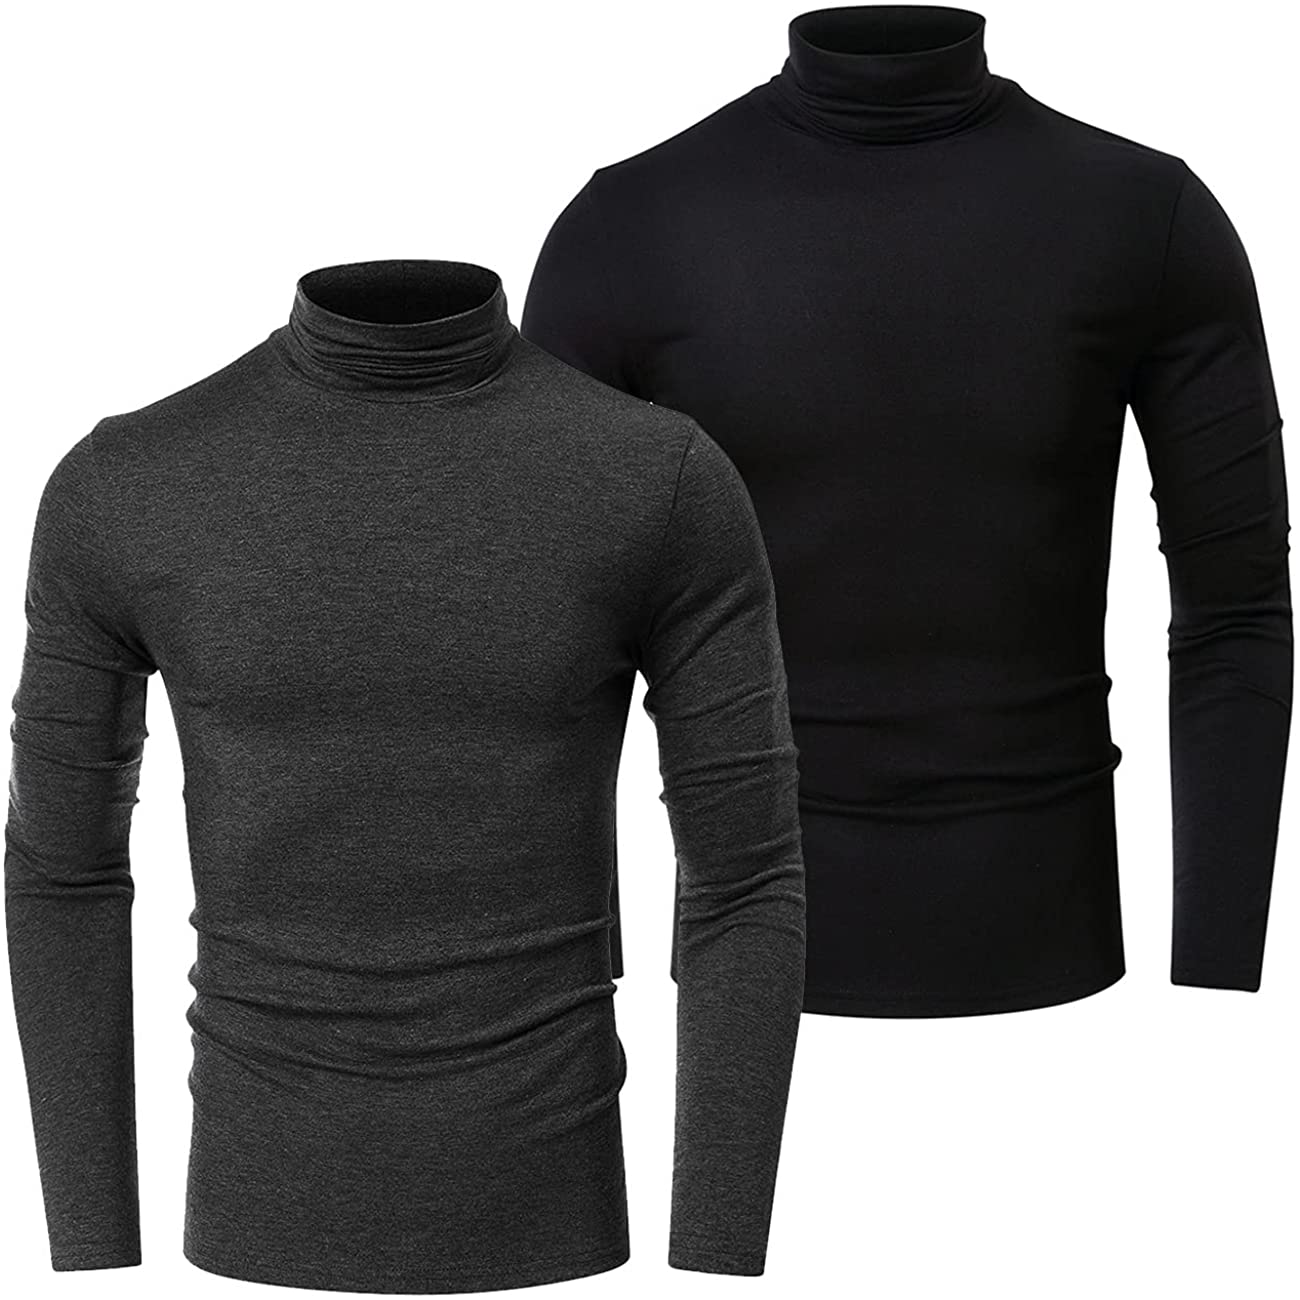 HTB Men's 1-2 Pack Long Sleeve T Shirts Big and Tall Slim Fit Cotton Pullover Base Layer Tops 